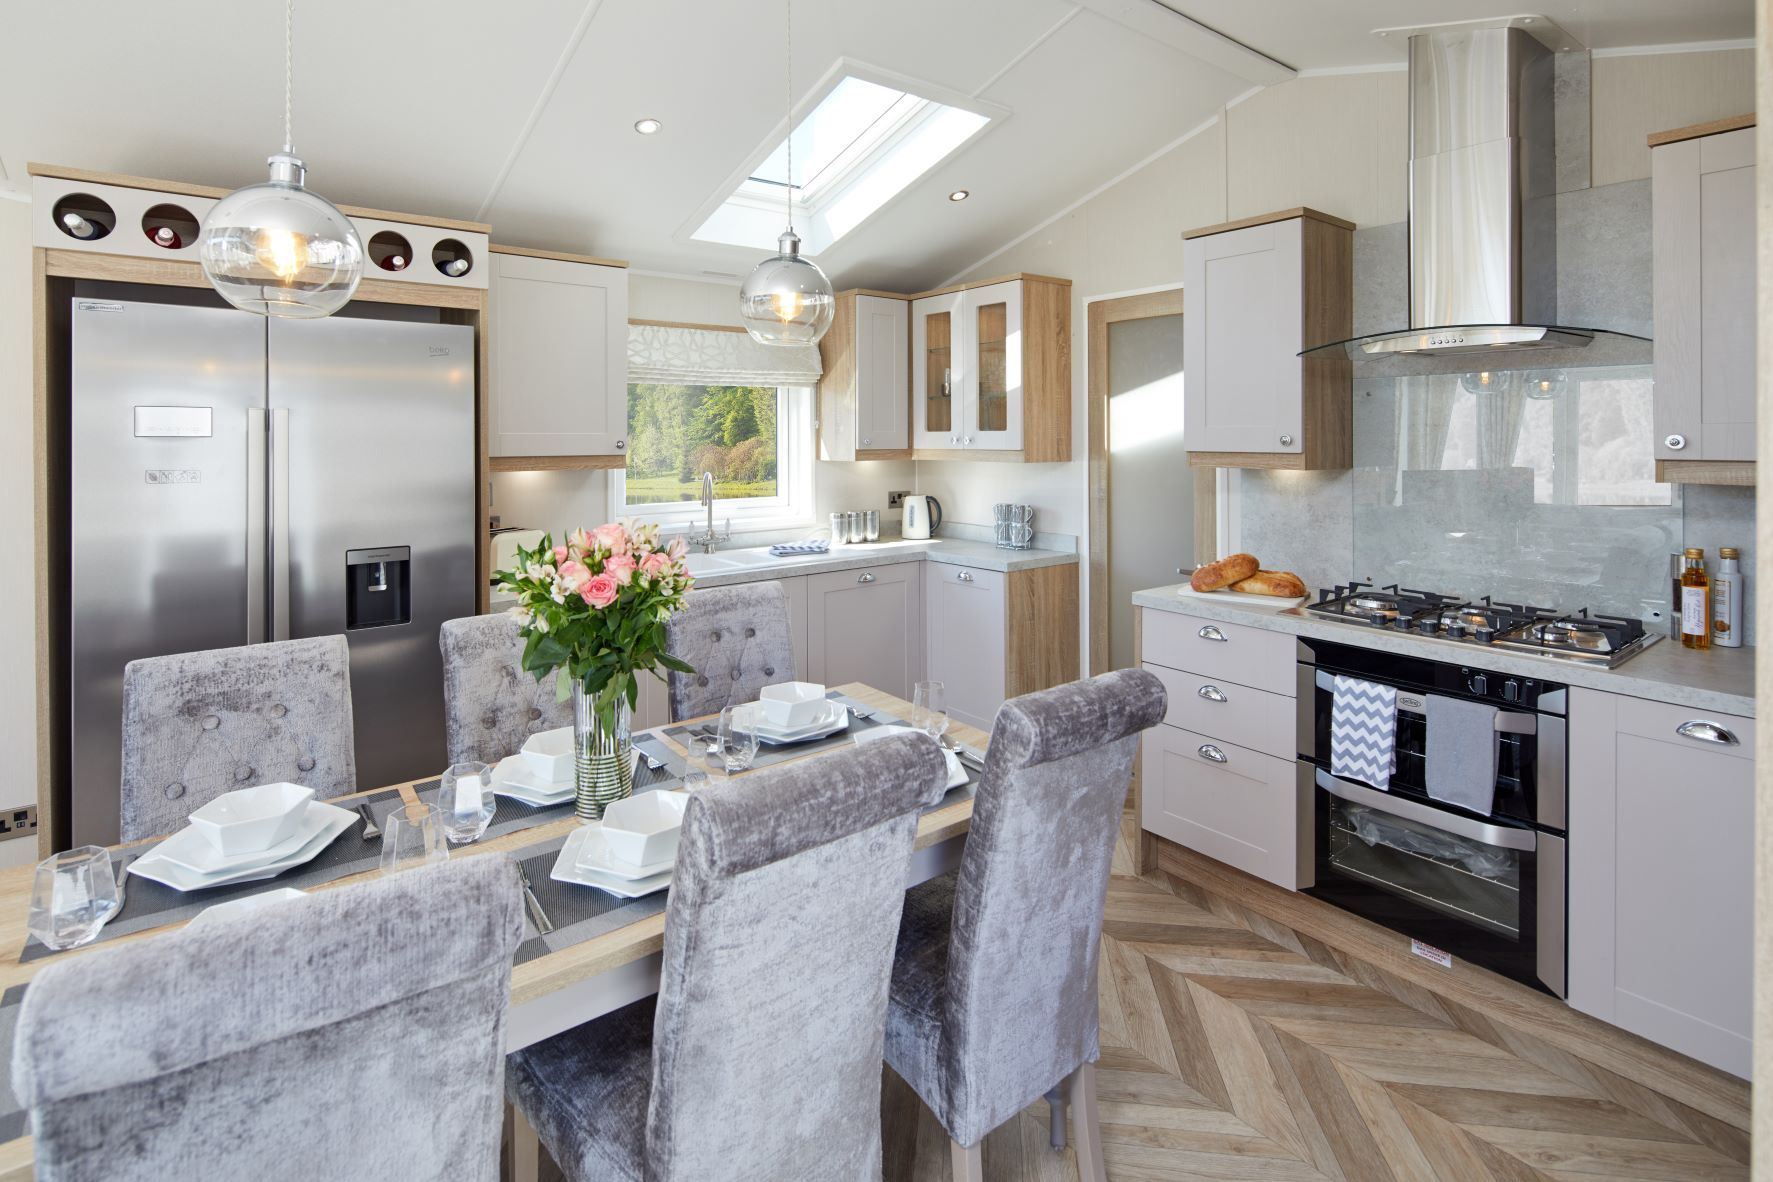 Image 2 of willerby-vogue-classique-5